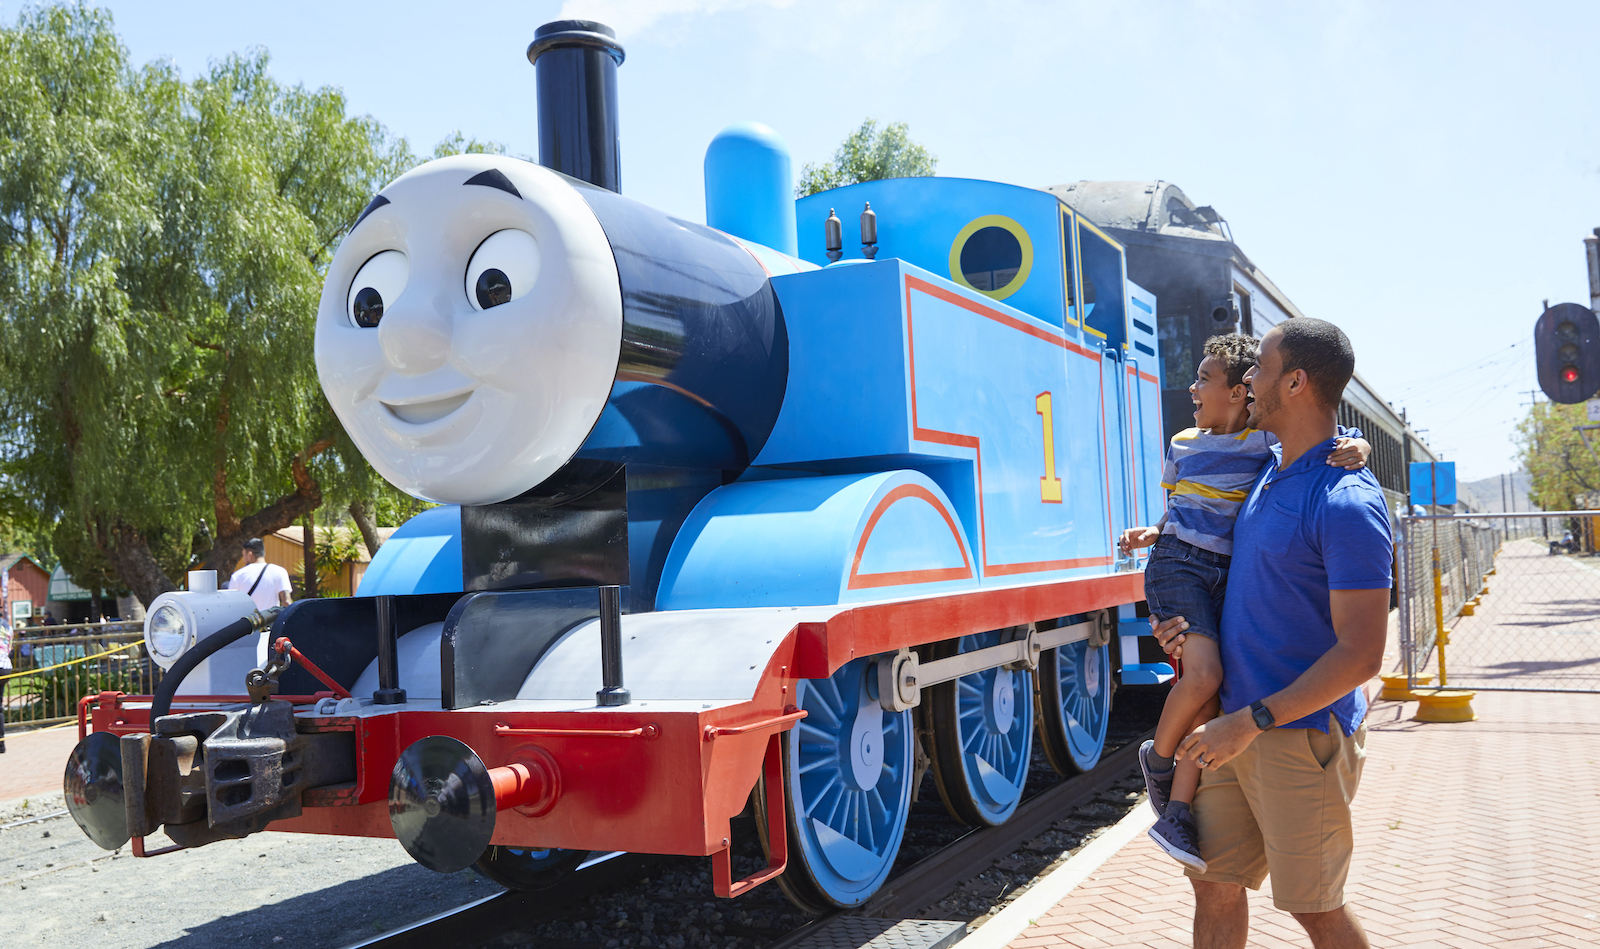 a day out with thomas coloring pages